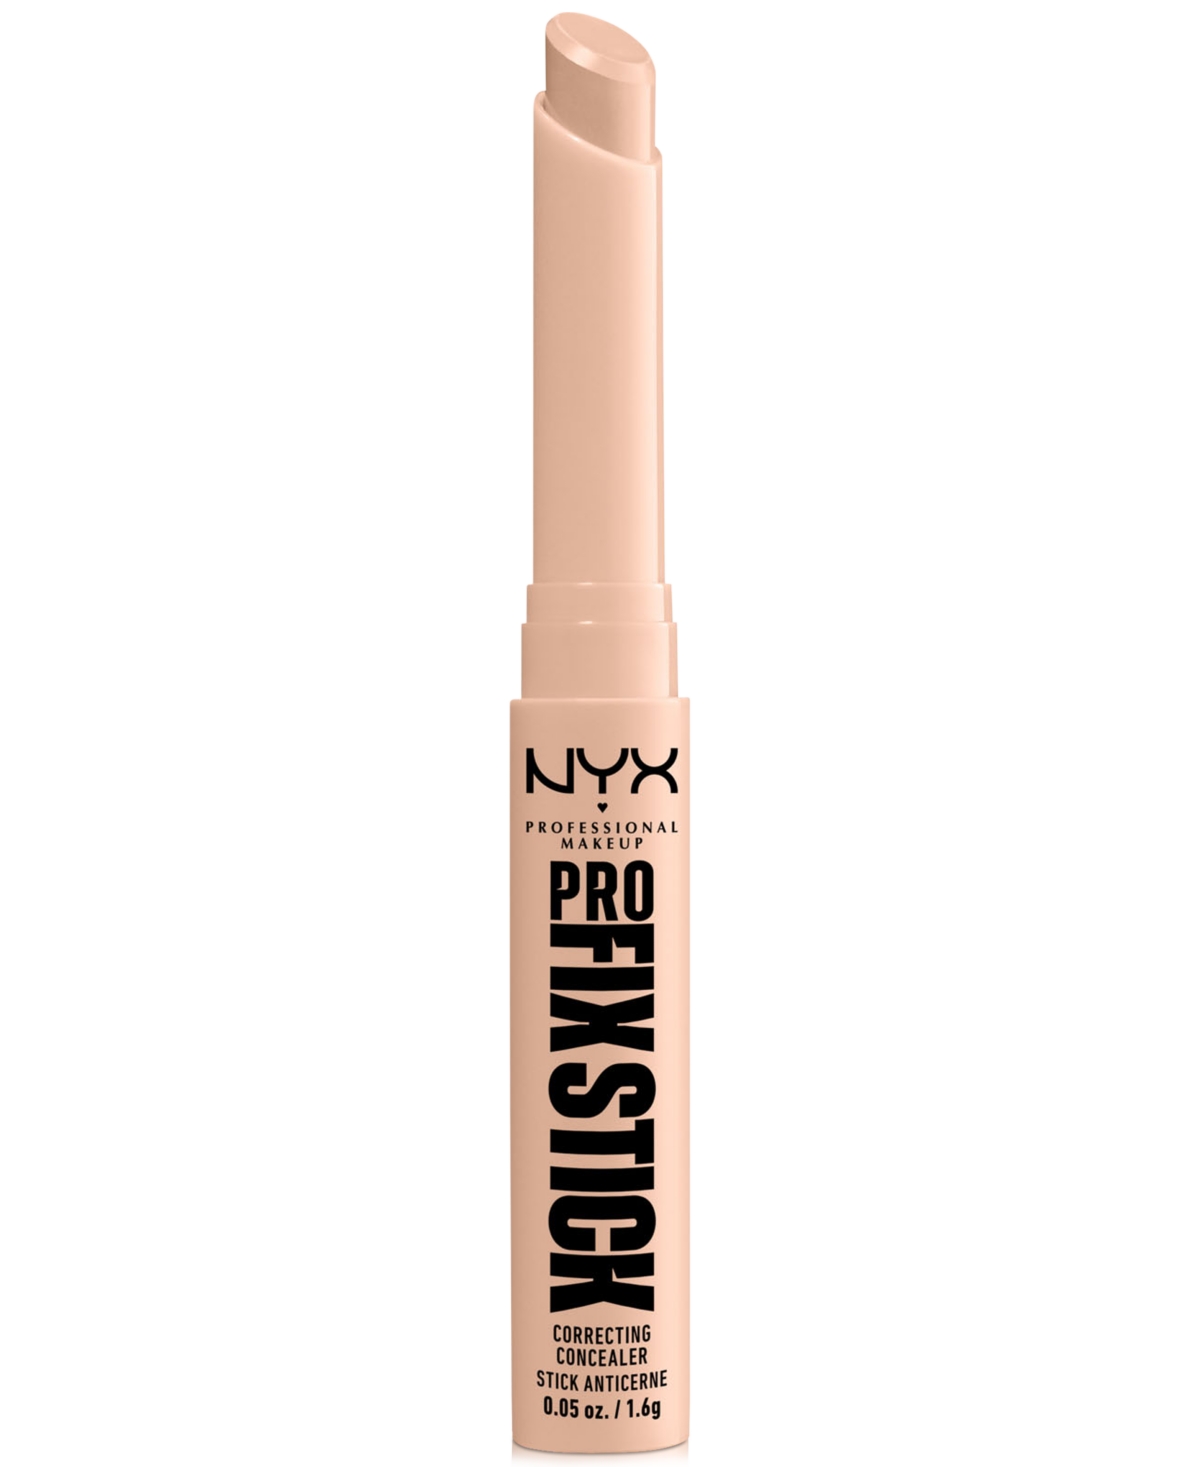 Nyx Professional Makeup Pro Fix Stick Correcting Concealer, 0.05 Oz. In Light